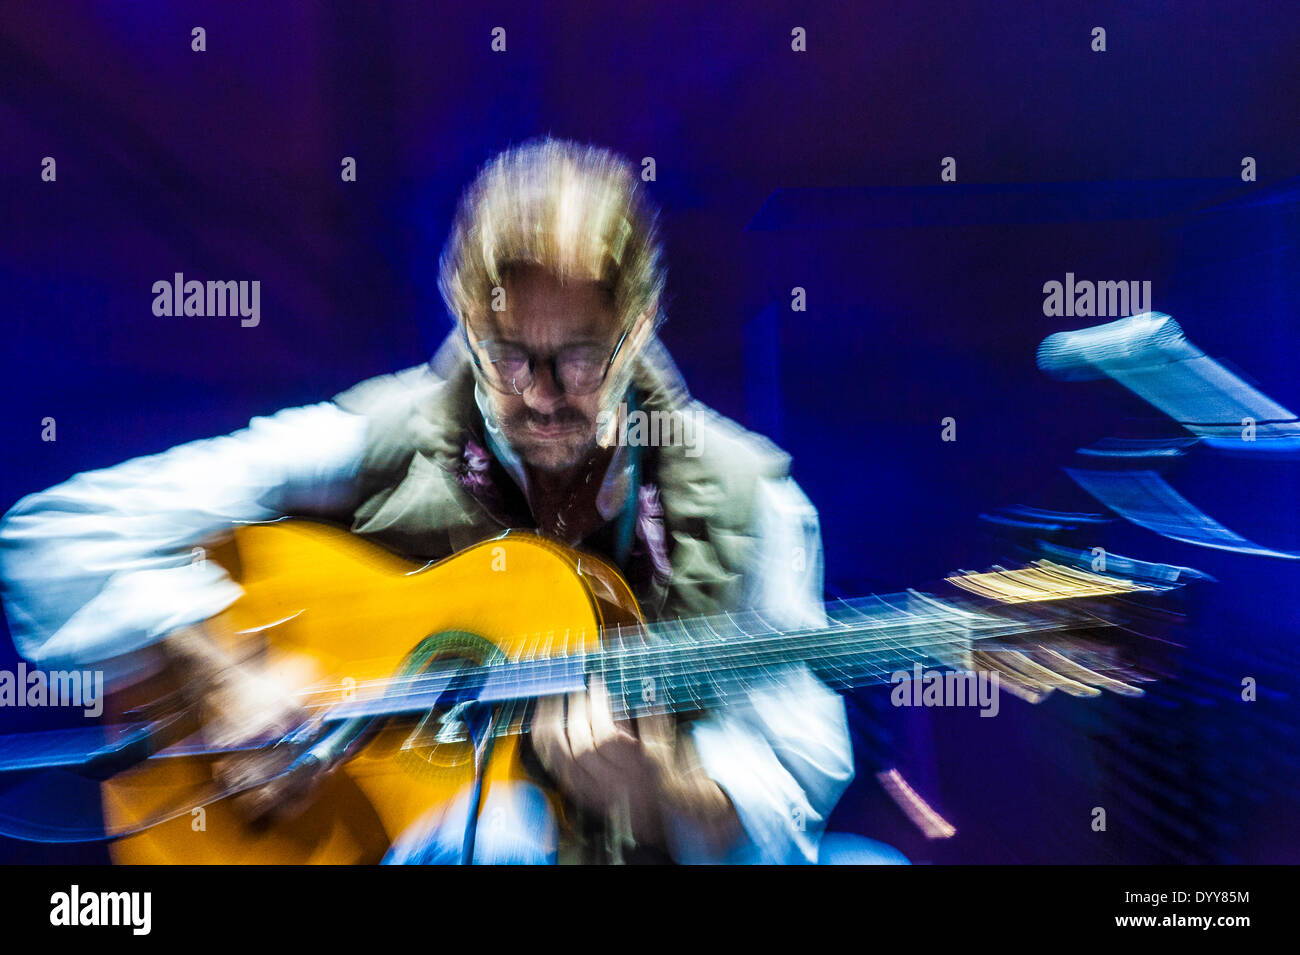 Turin, Italie. Apr 27, 2014. Torino Jazz Festival 27 avril 2014 - Al Di Meola Playng Beatles et plus -Al Di Meola Crédit : Realy Easy Star/Alamy Live News Banque D'Images